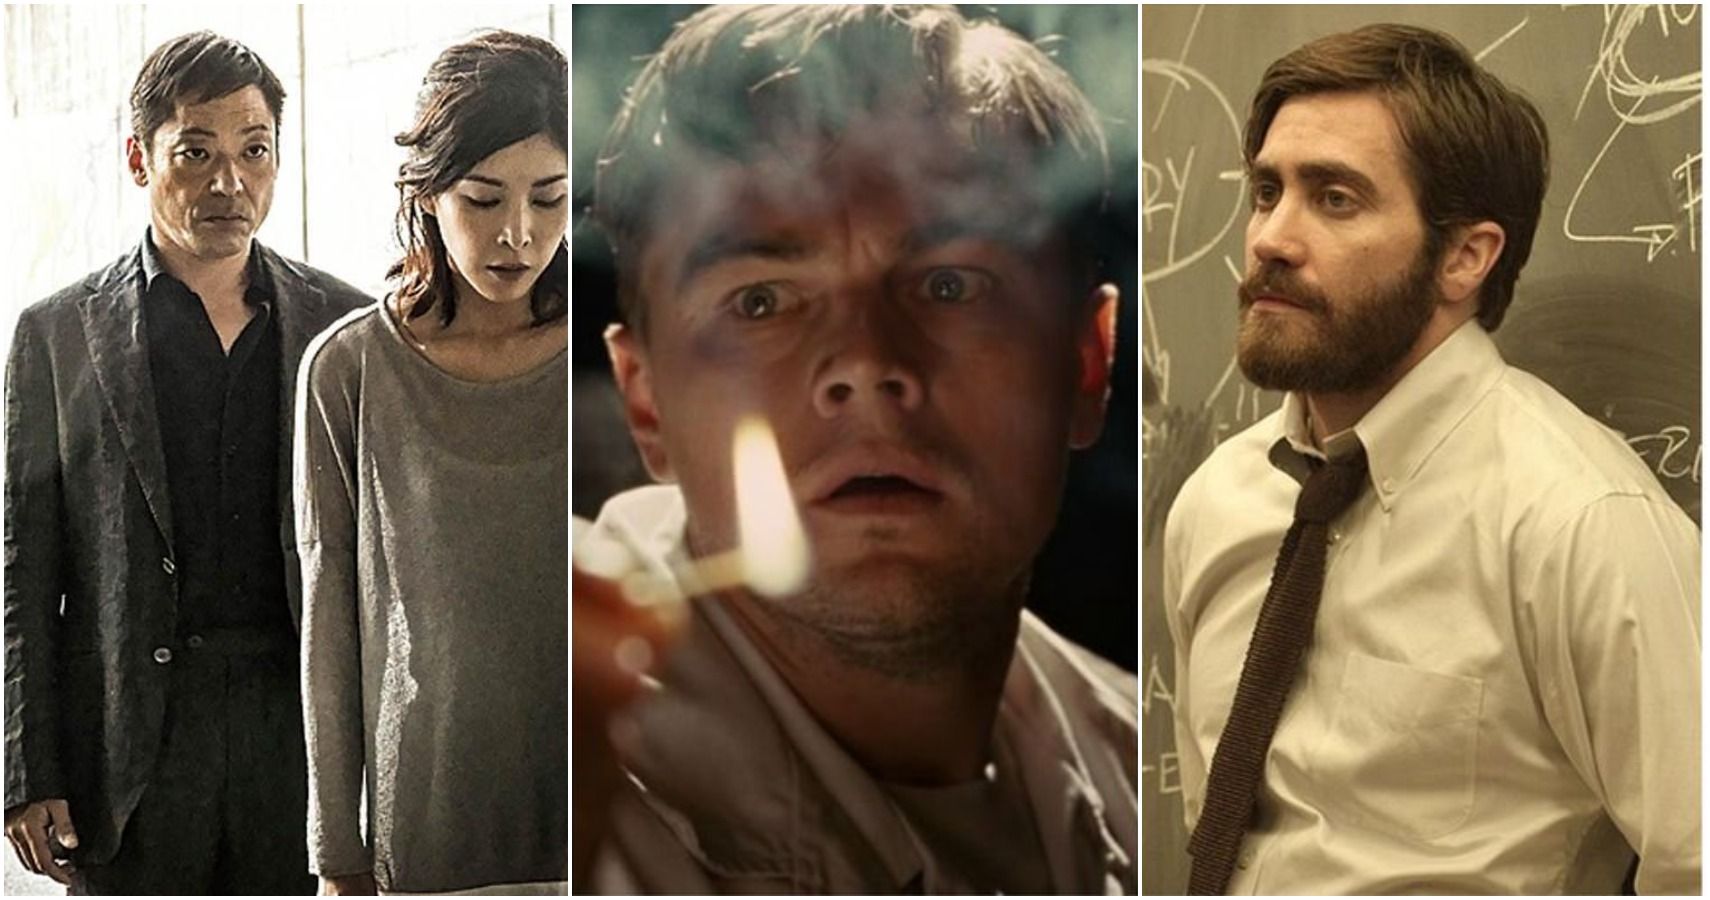 10 MindBlowing Psychological Thrillers From The 2010s (That Will Stick